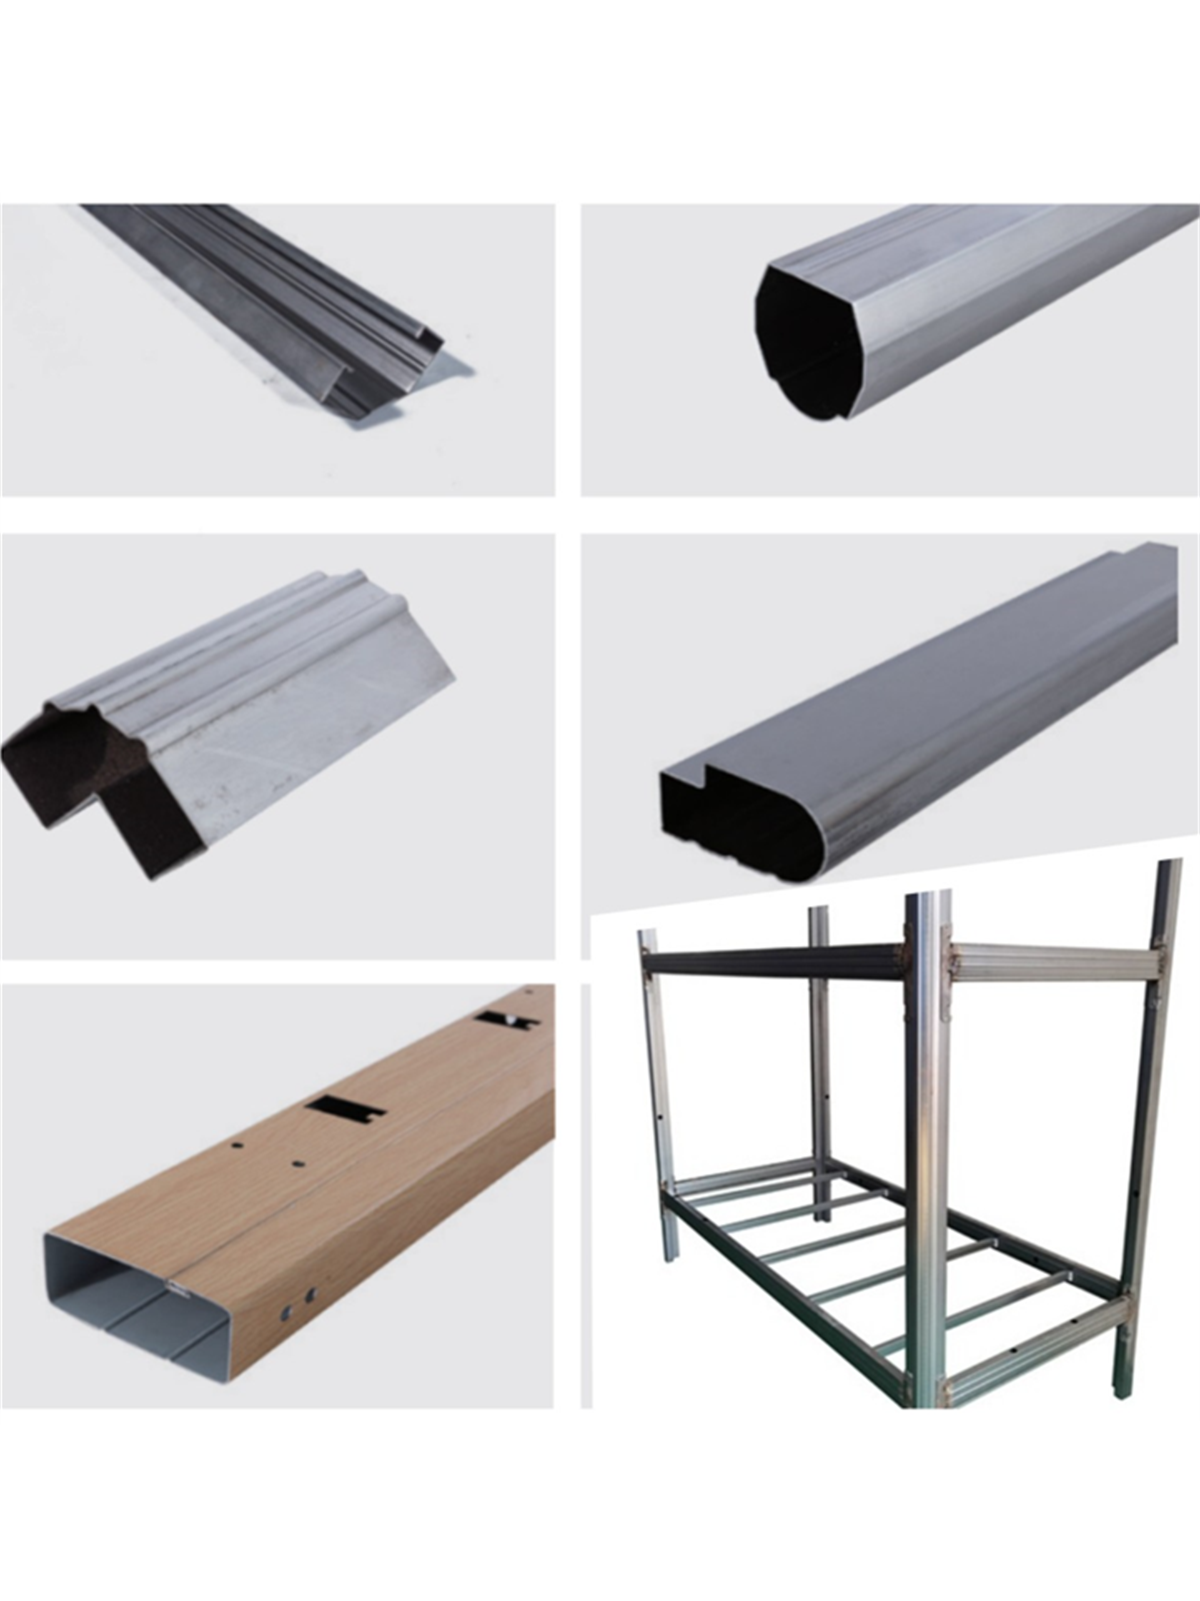 Apartment steel bed frame beam & upright - CUSTOM PRECISION ROLL FORMING SOLUTIONS